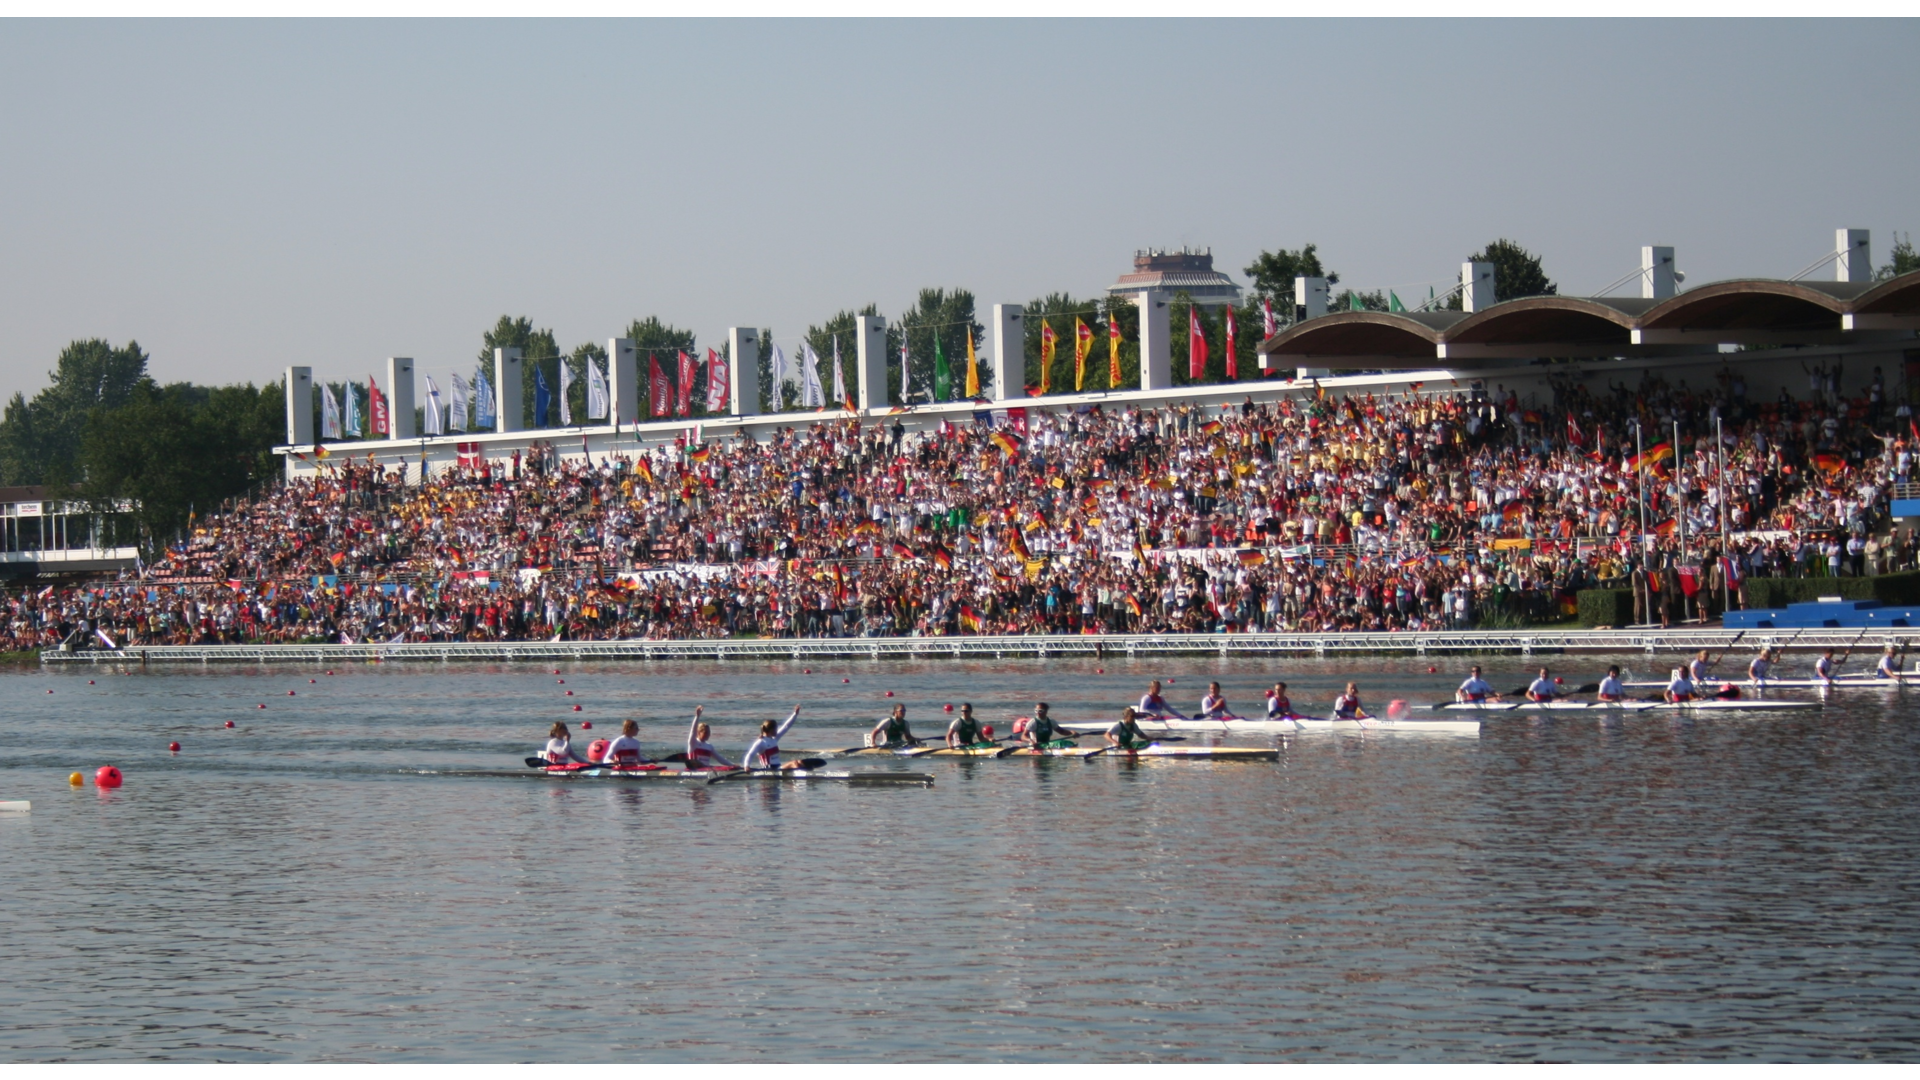 Duisburg will host the ICF Canoe Sprint World Championships, an Olympic qualifying event, for a fifth time in 2023 ©KNV